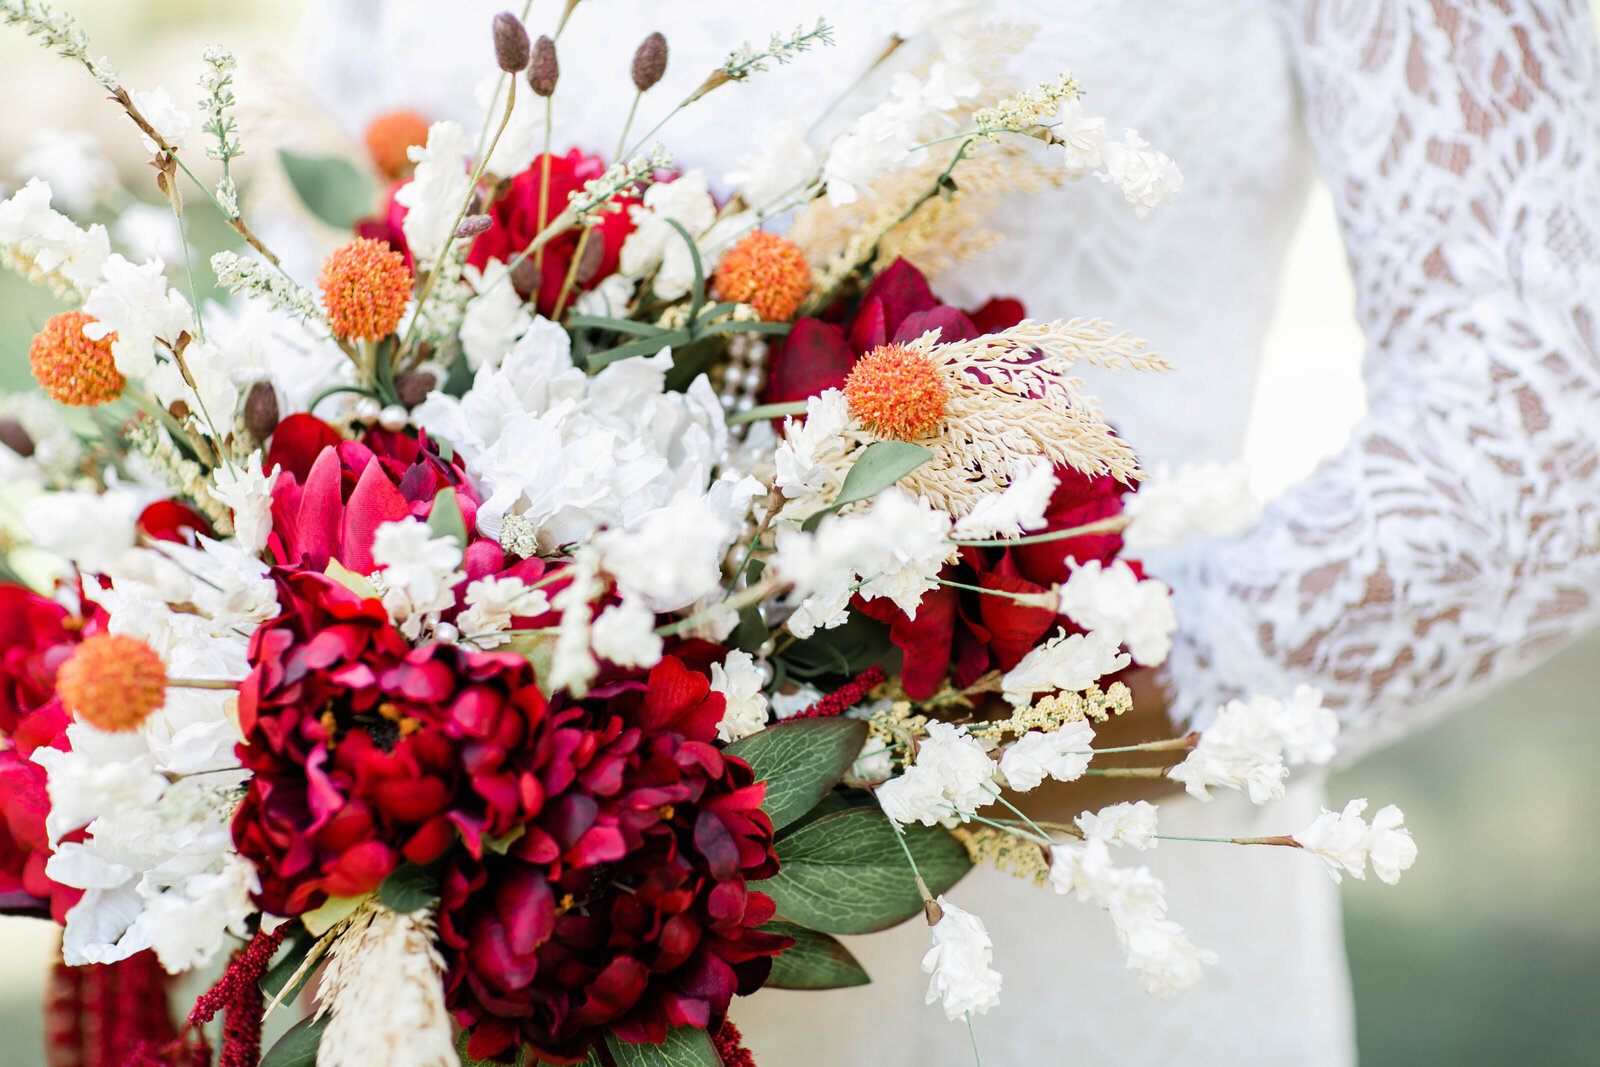 Bride holding wedding bouquet with red, white, and orange flowers and greenery